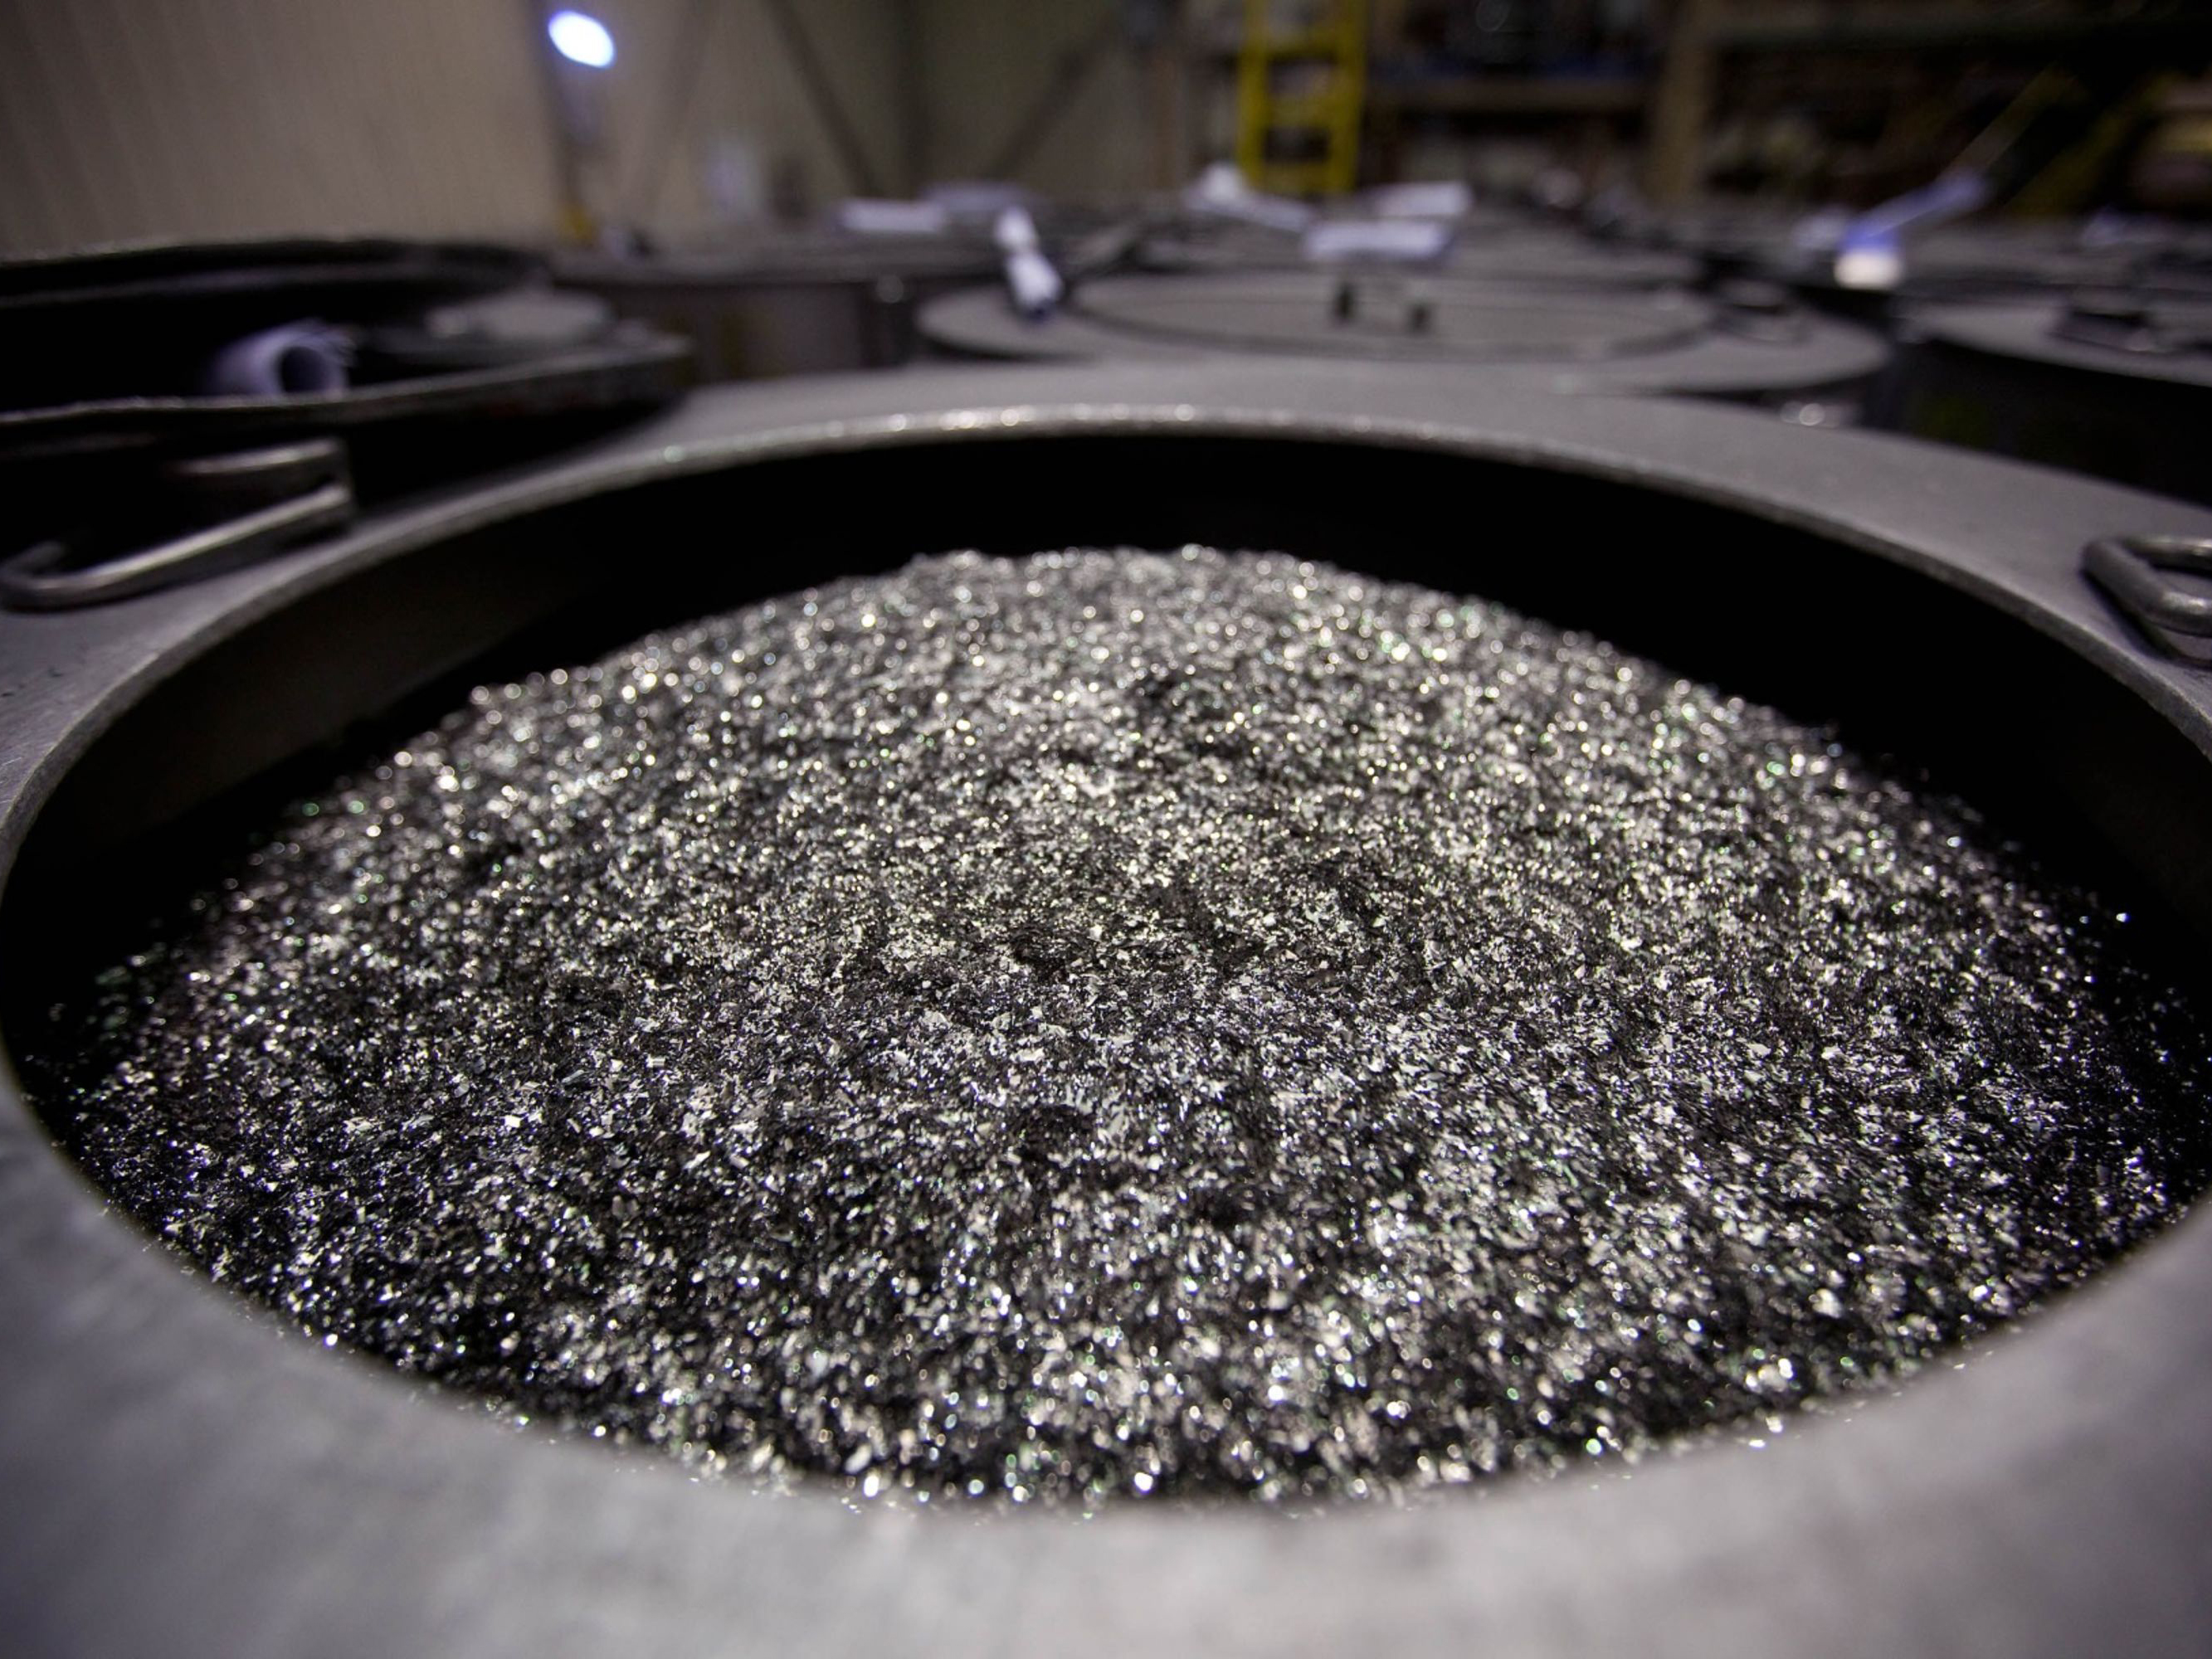 Another Attempt to Produce Rare-Earth Minerals in the U.S.